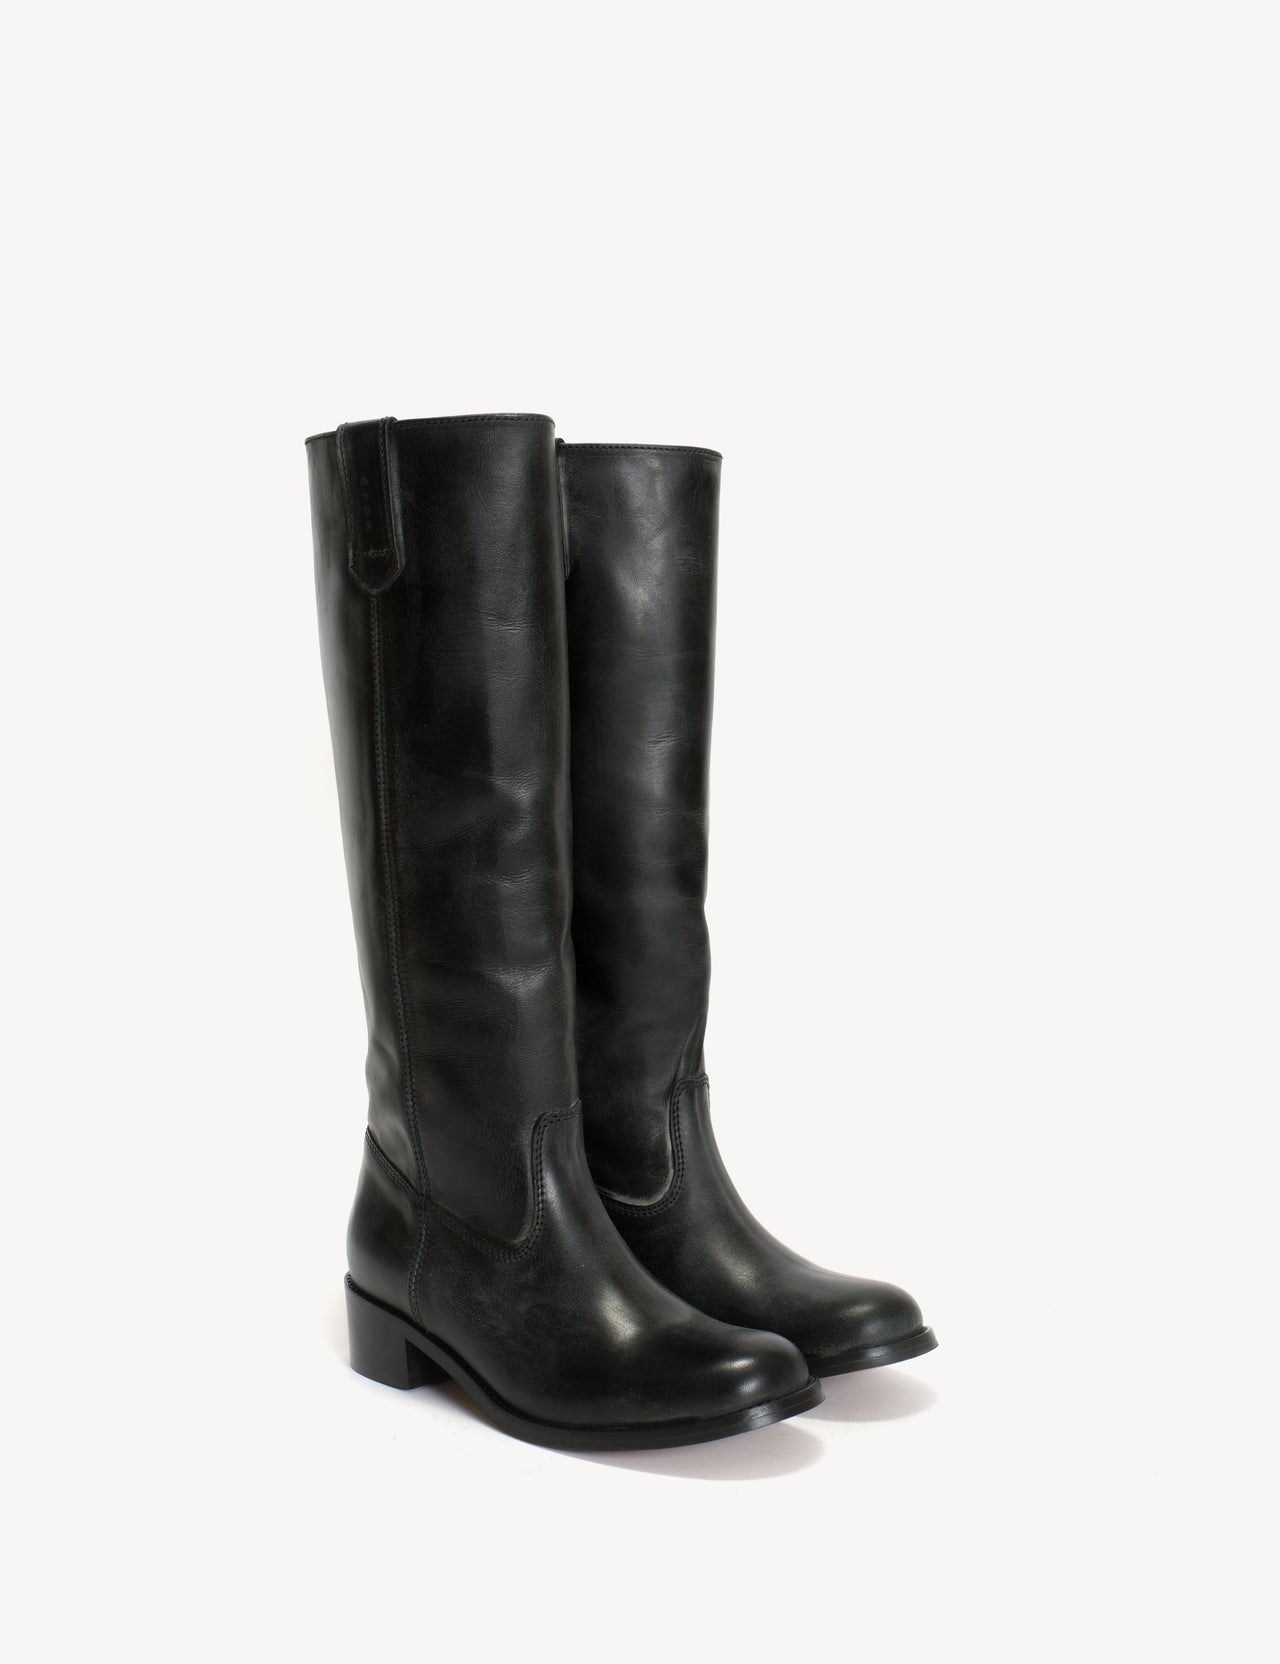 Ann Gaucho Boot In Charcoal Black Escovado Leather